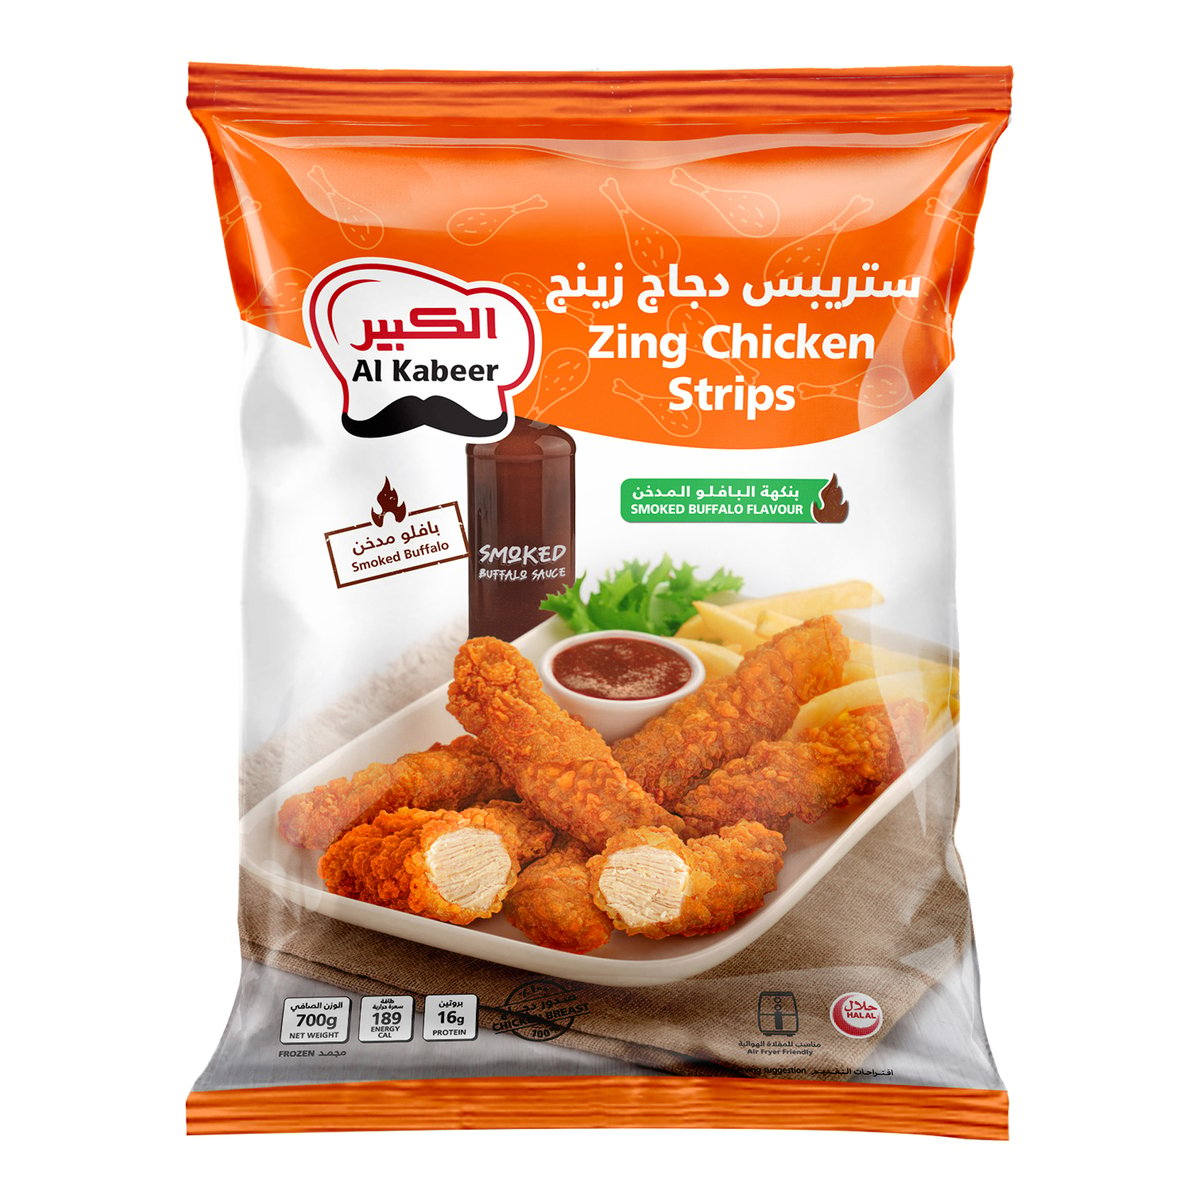 Al Kabeer Zing Chicken Strips Smoked Buffalo Flavour 700 g